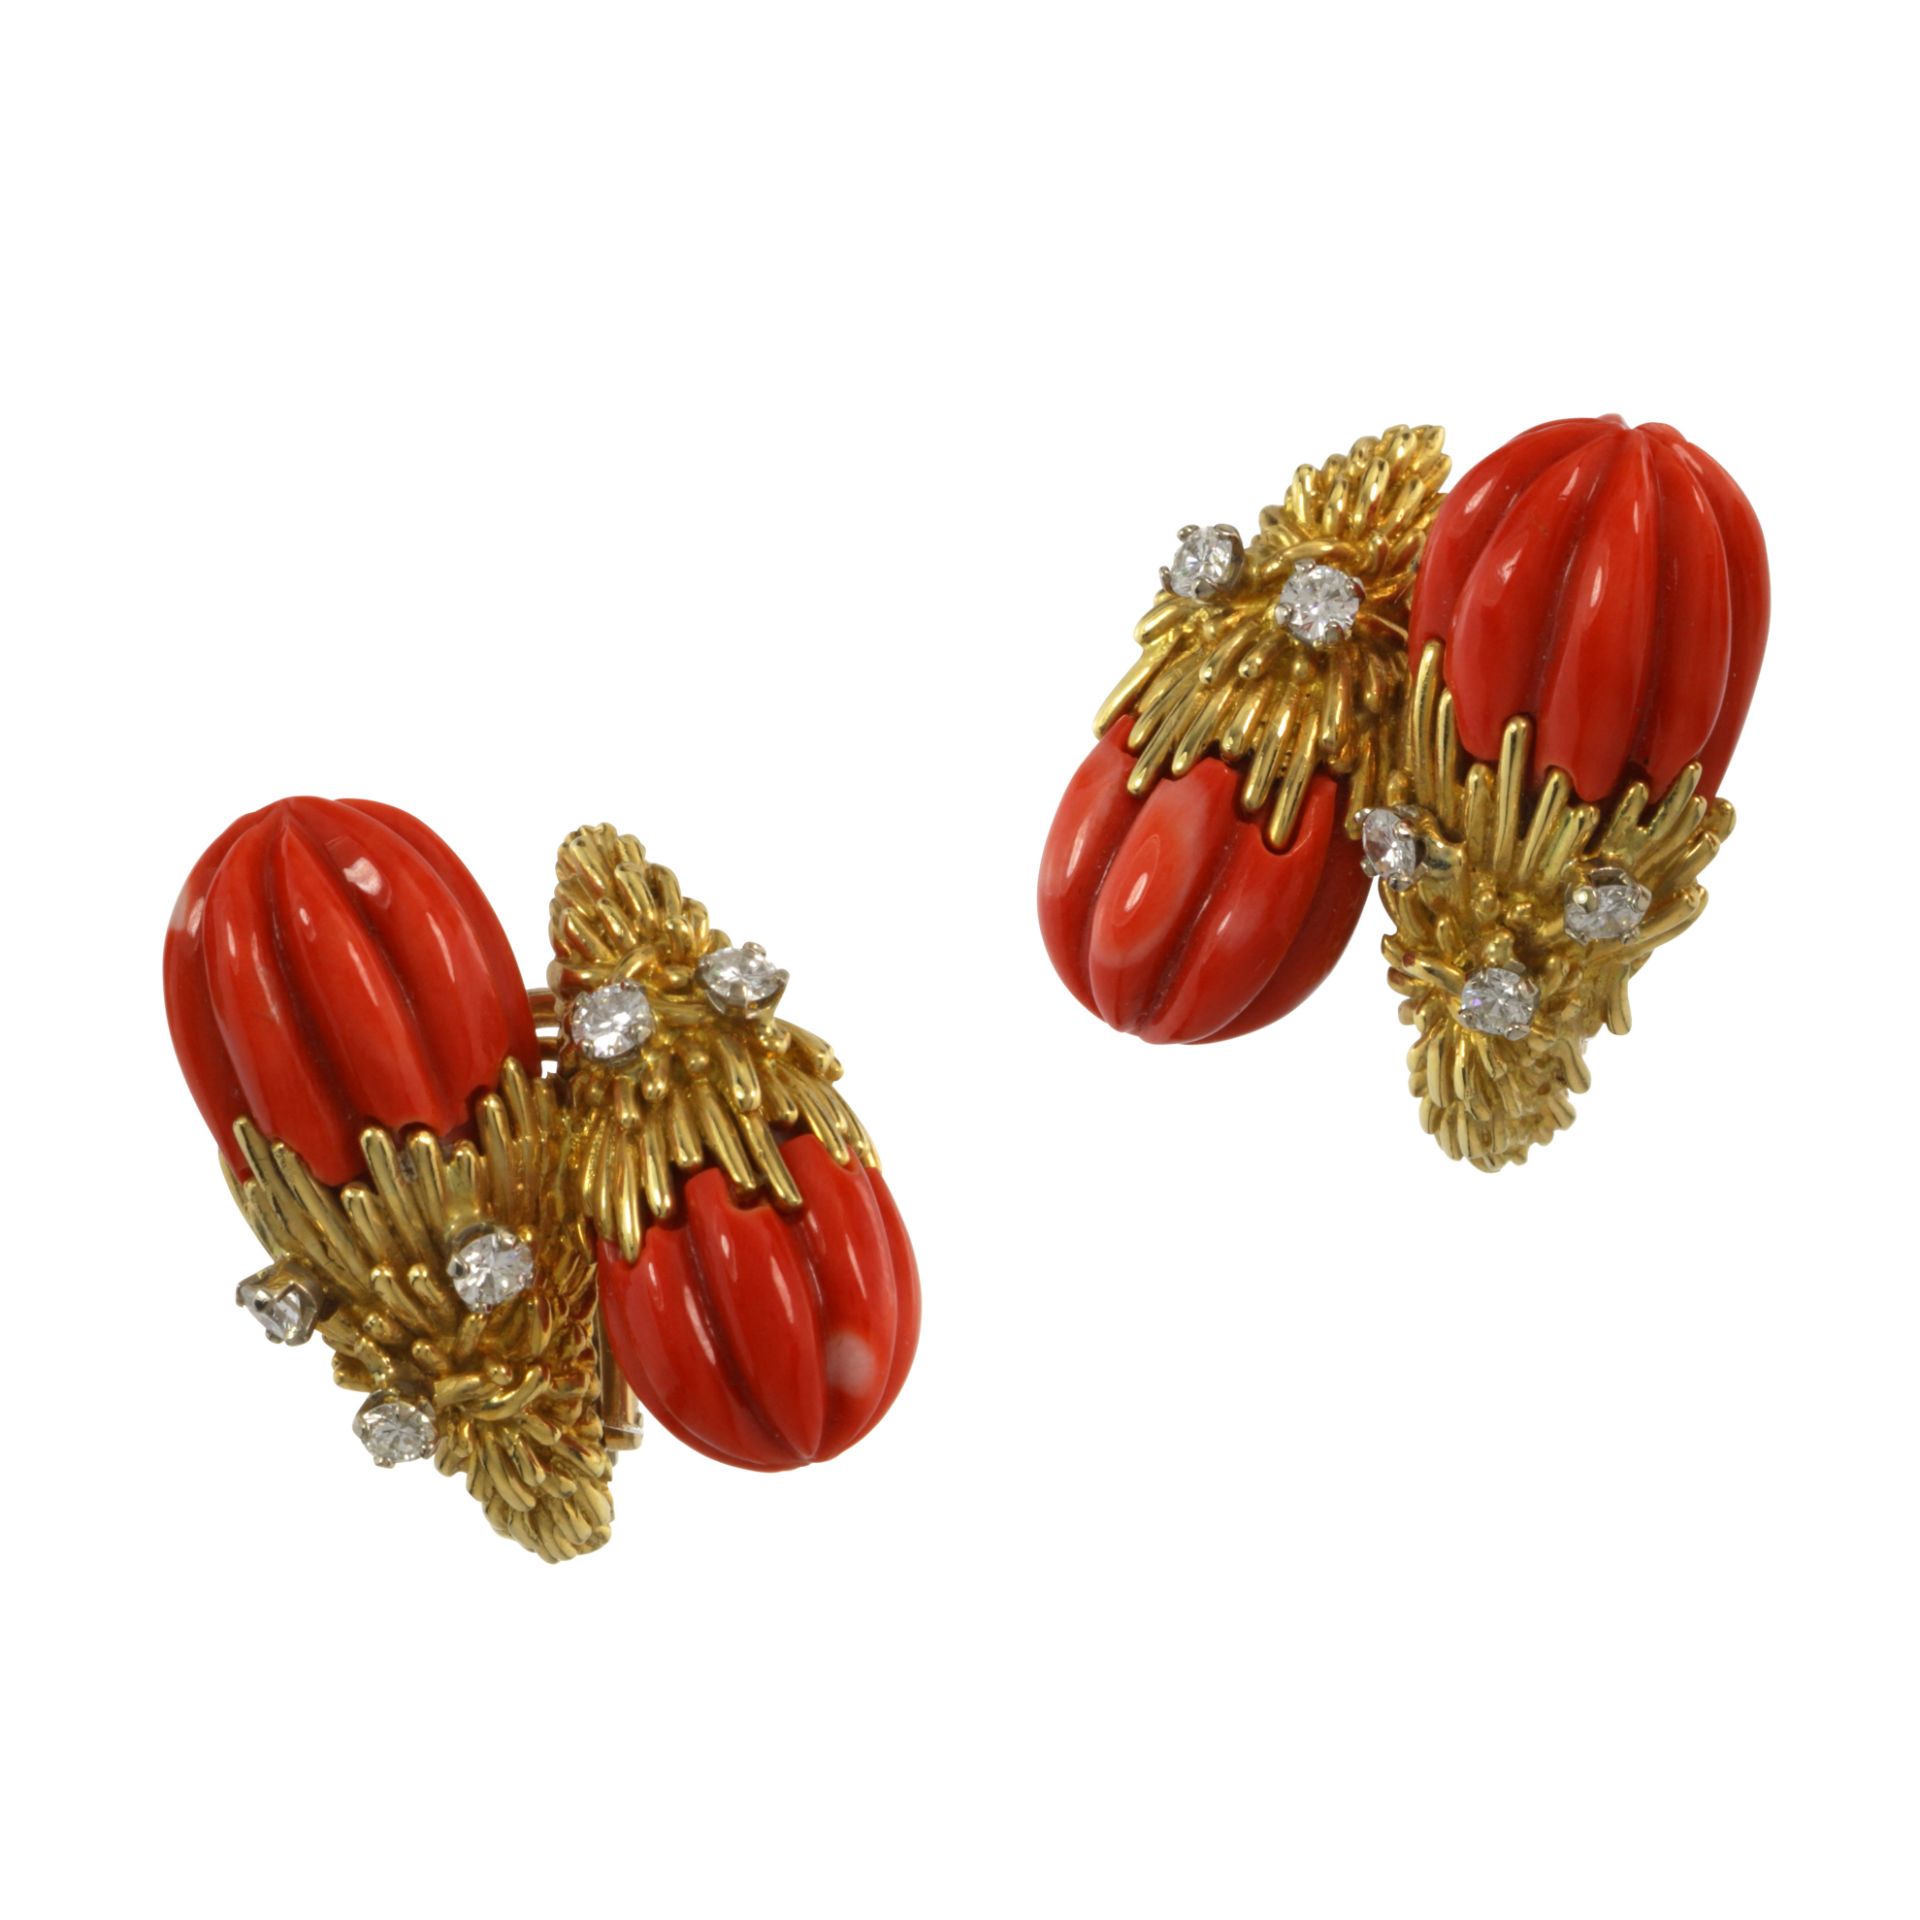 A PAIR OF VINTAGE CORAL AND DIAMOND CLIP EARRINGS in 18ct yellow gold, each designed with opposing